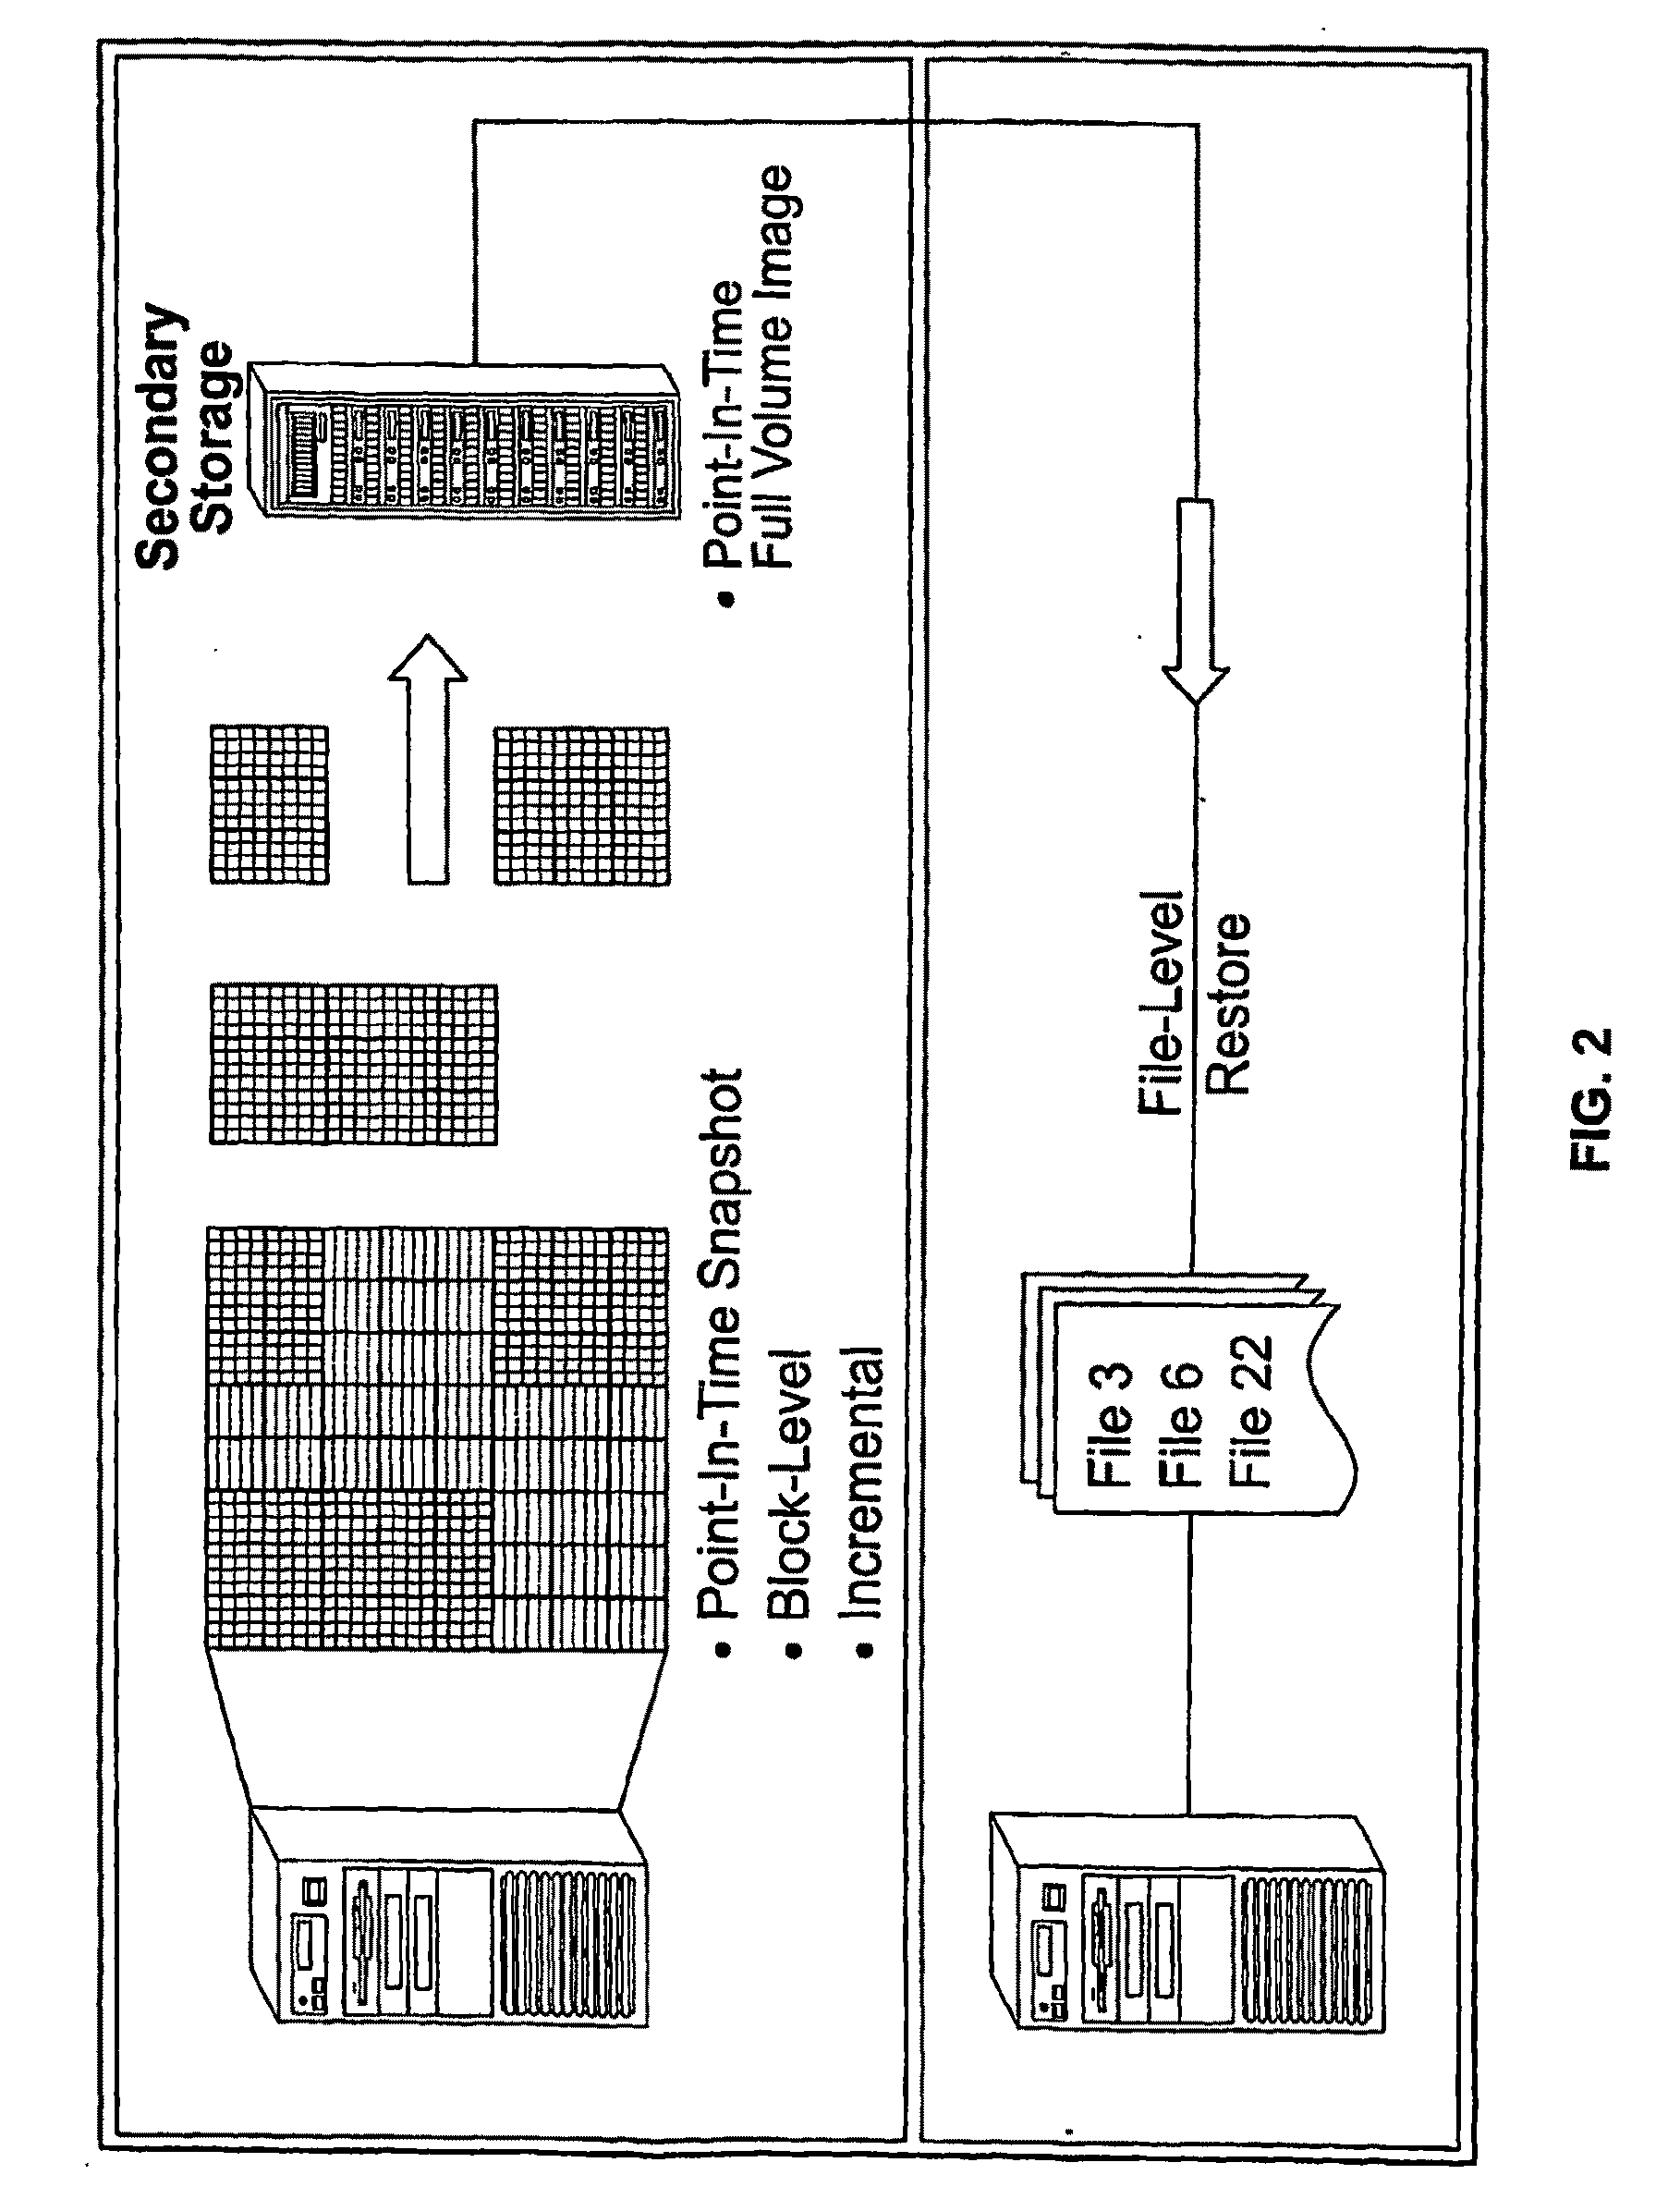 System And Method for High Performance Enterprise Data Protection